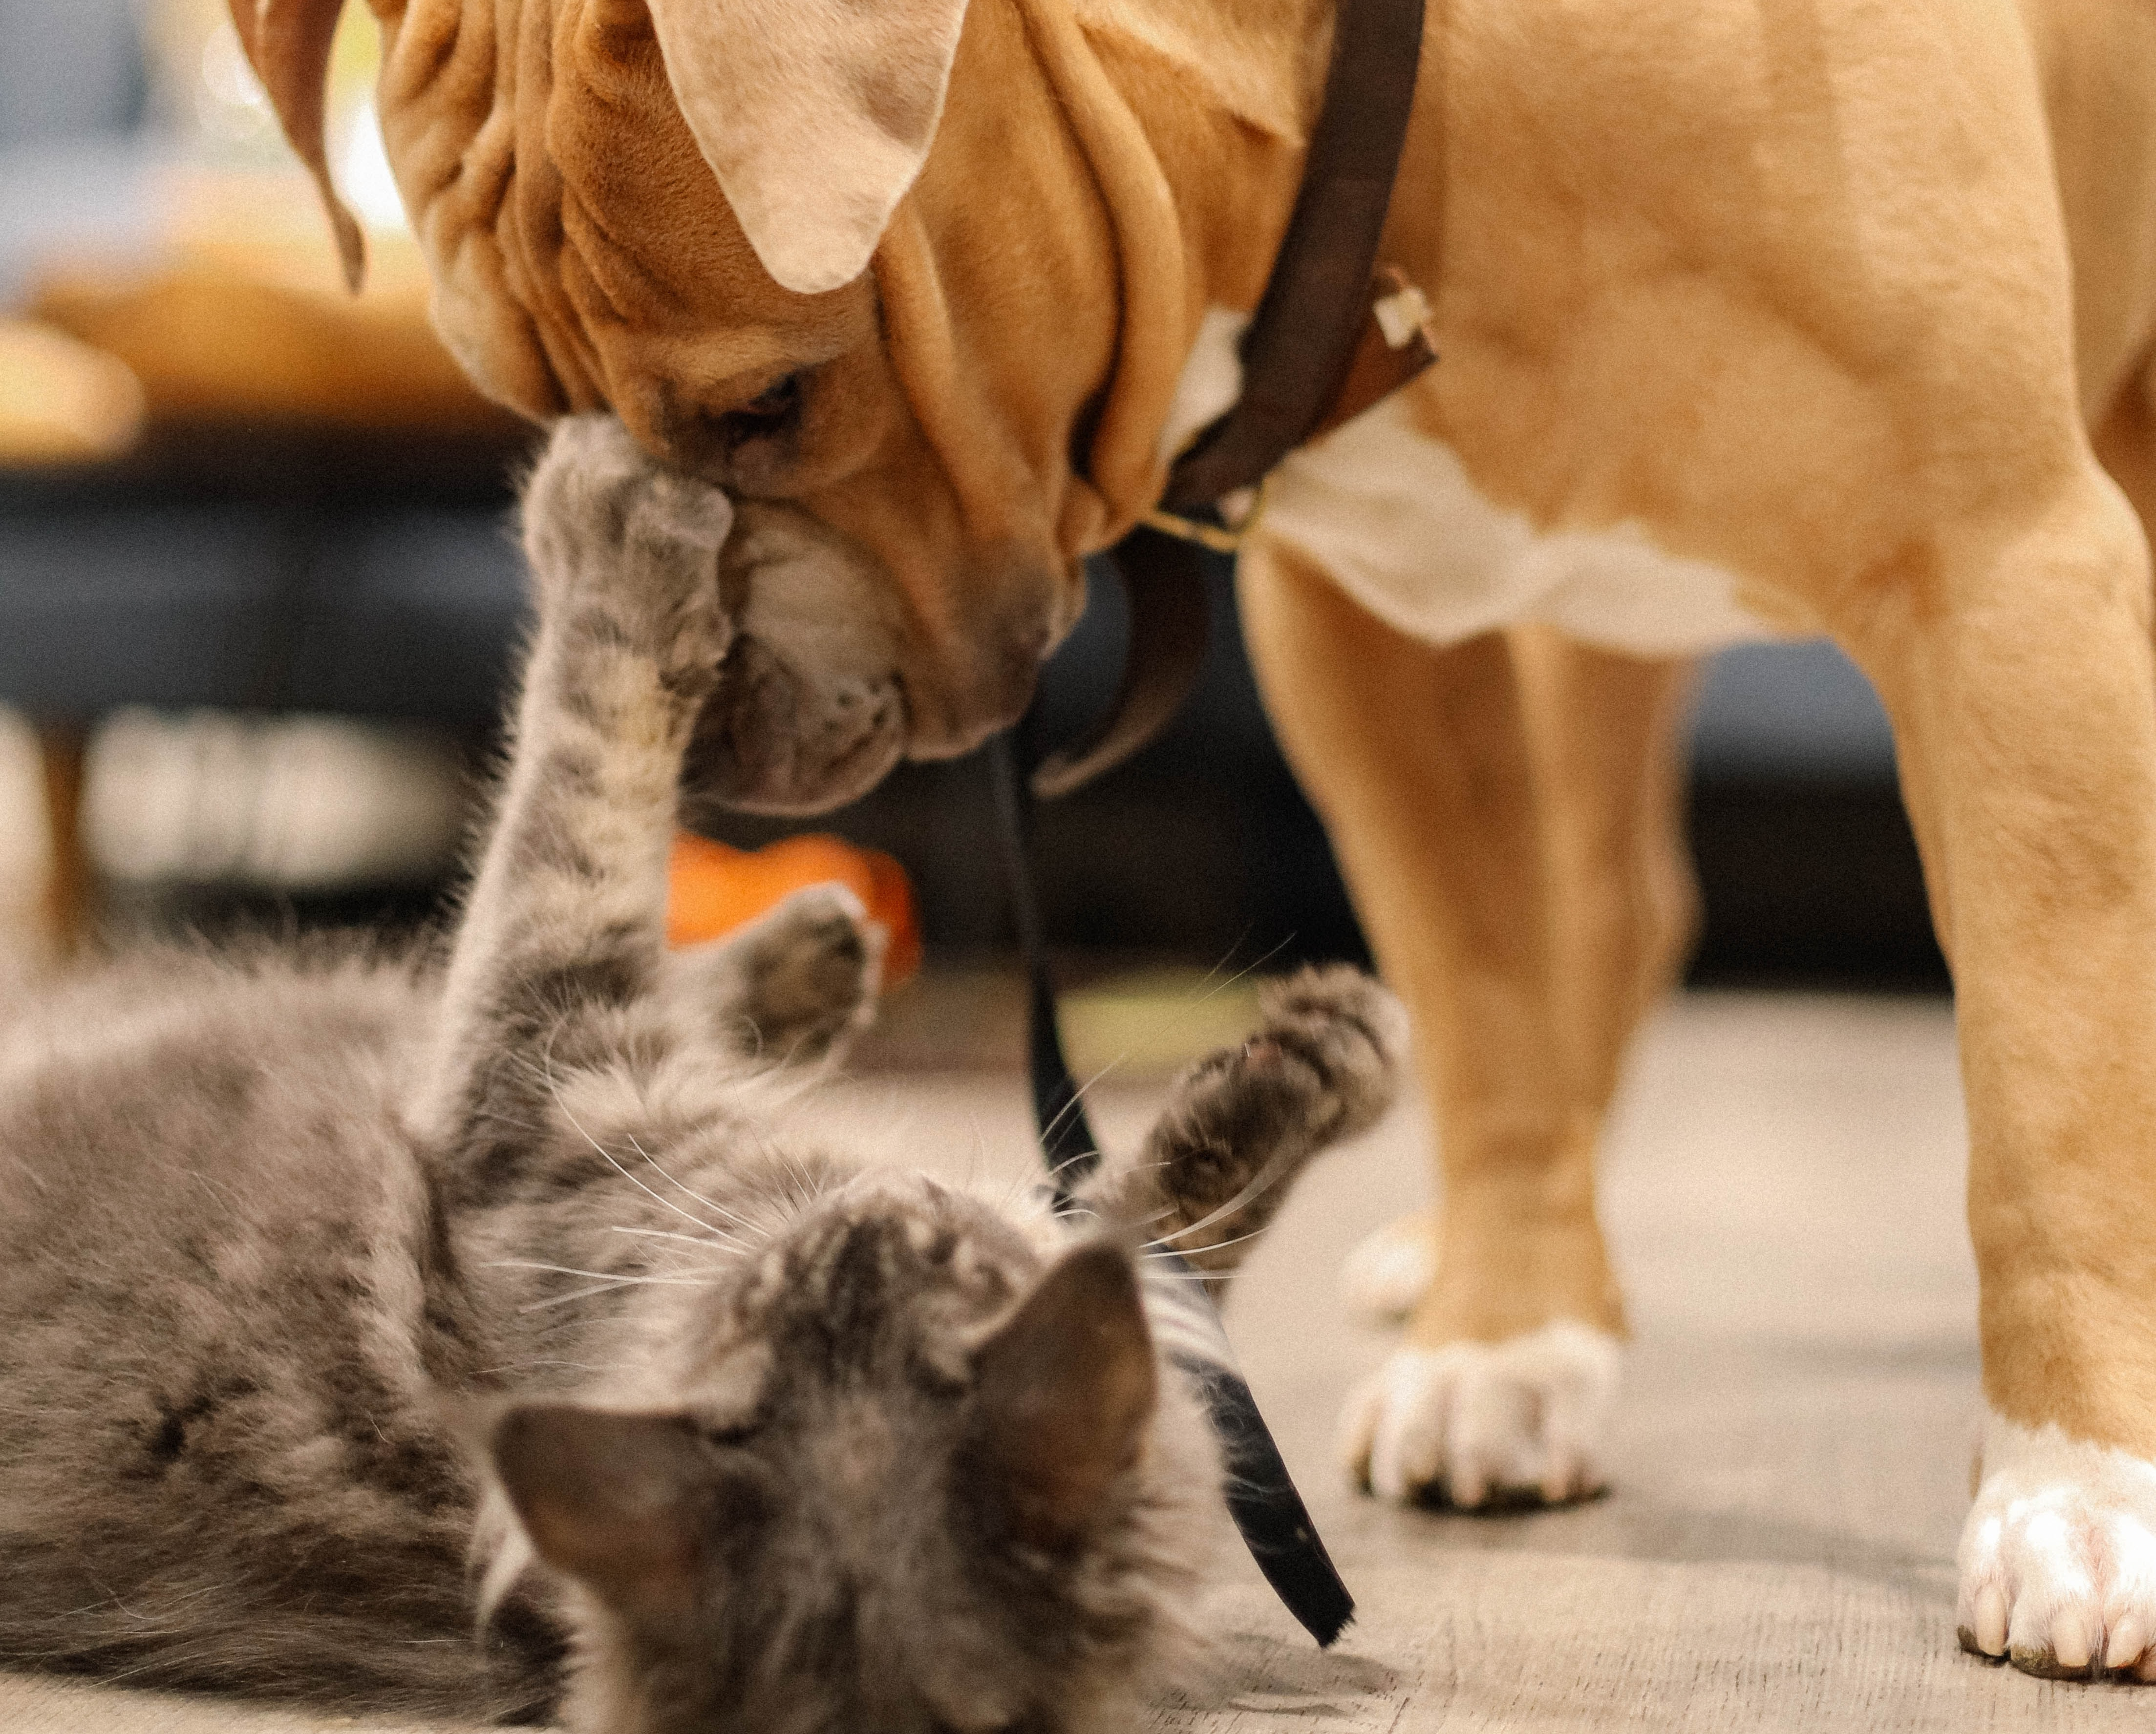 kitten and dog playing